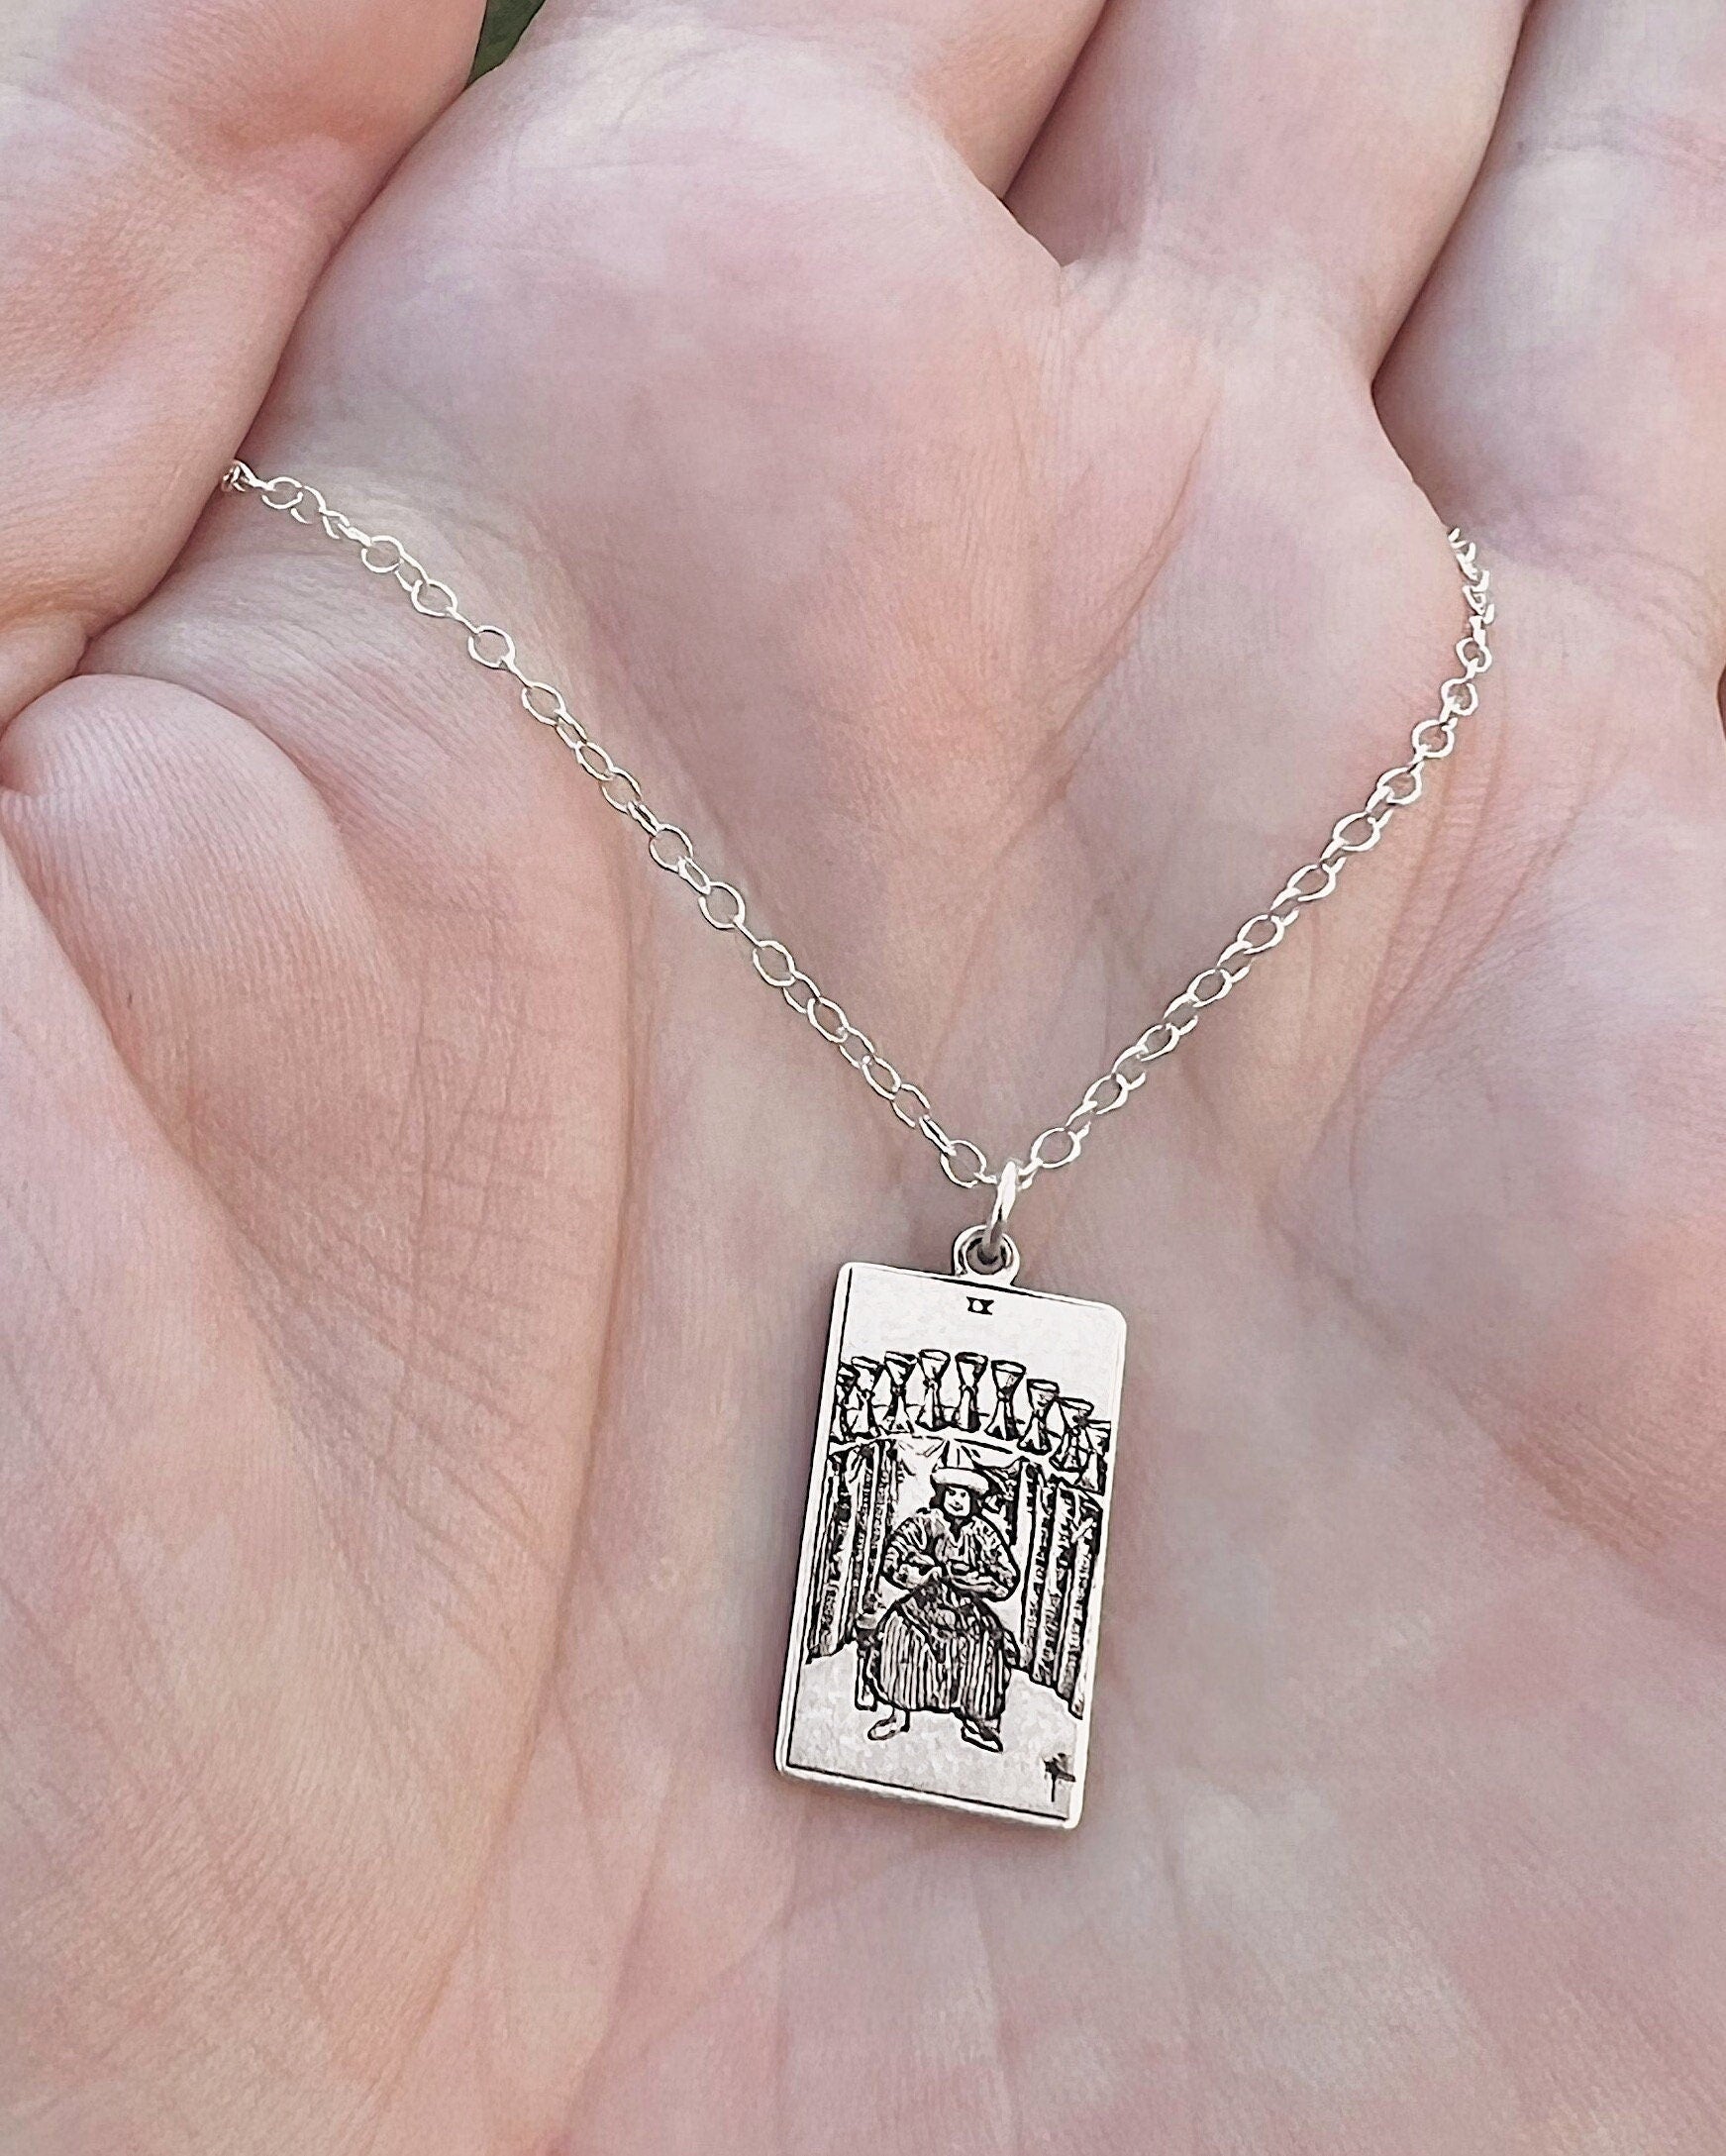 Nine of Cups Tarot Card Necklace - Sterling Silver